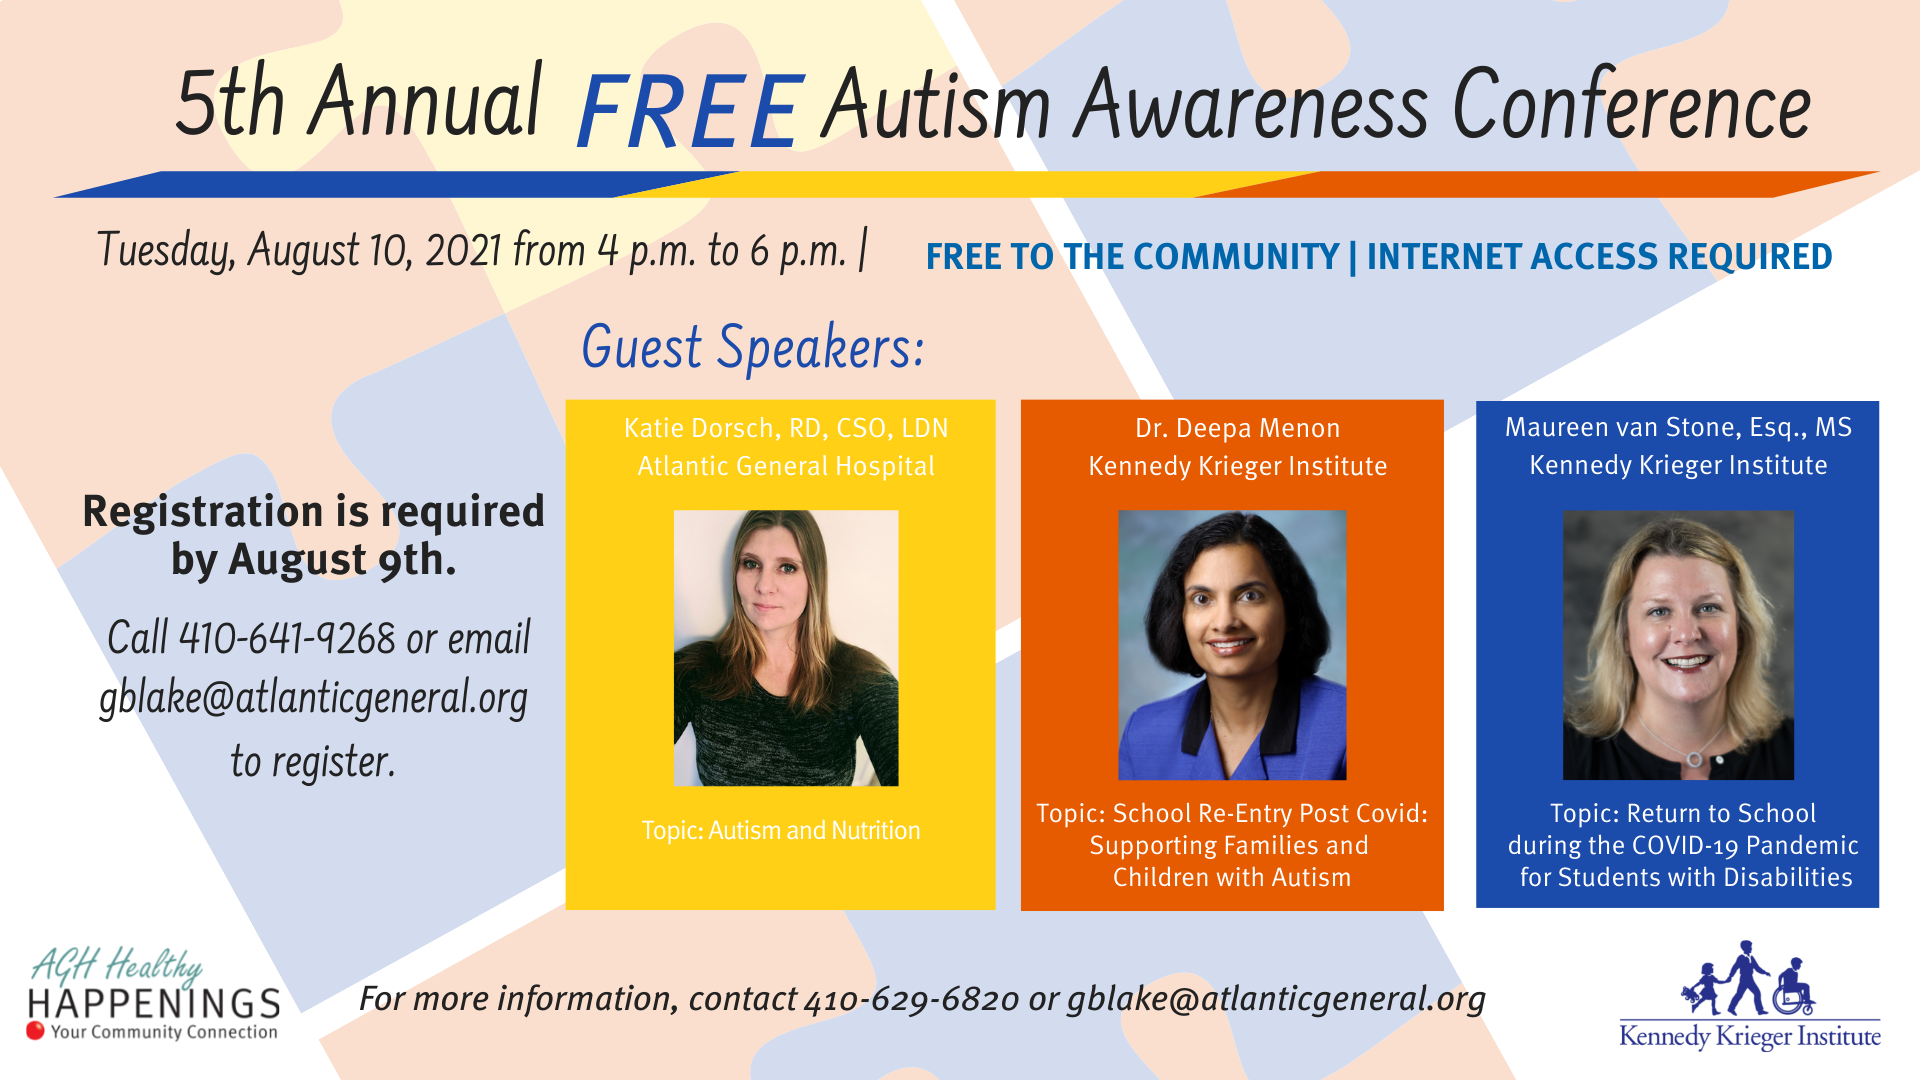 ATLANTIC GENERAL HOSPITAL TO HOST VIRTUAL AUTISM CONFERENCE IN AUGUST